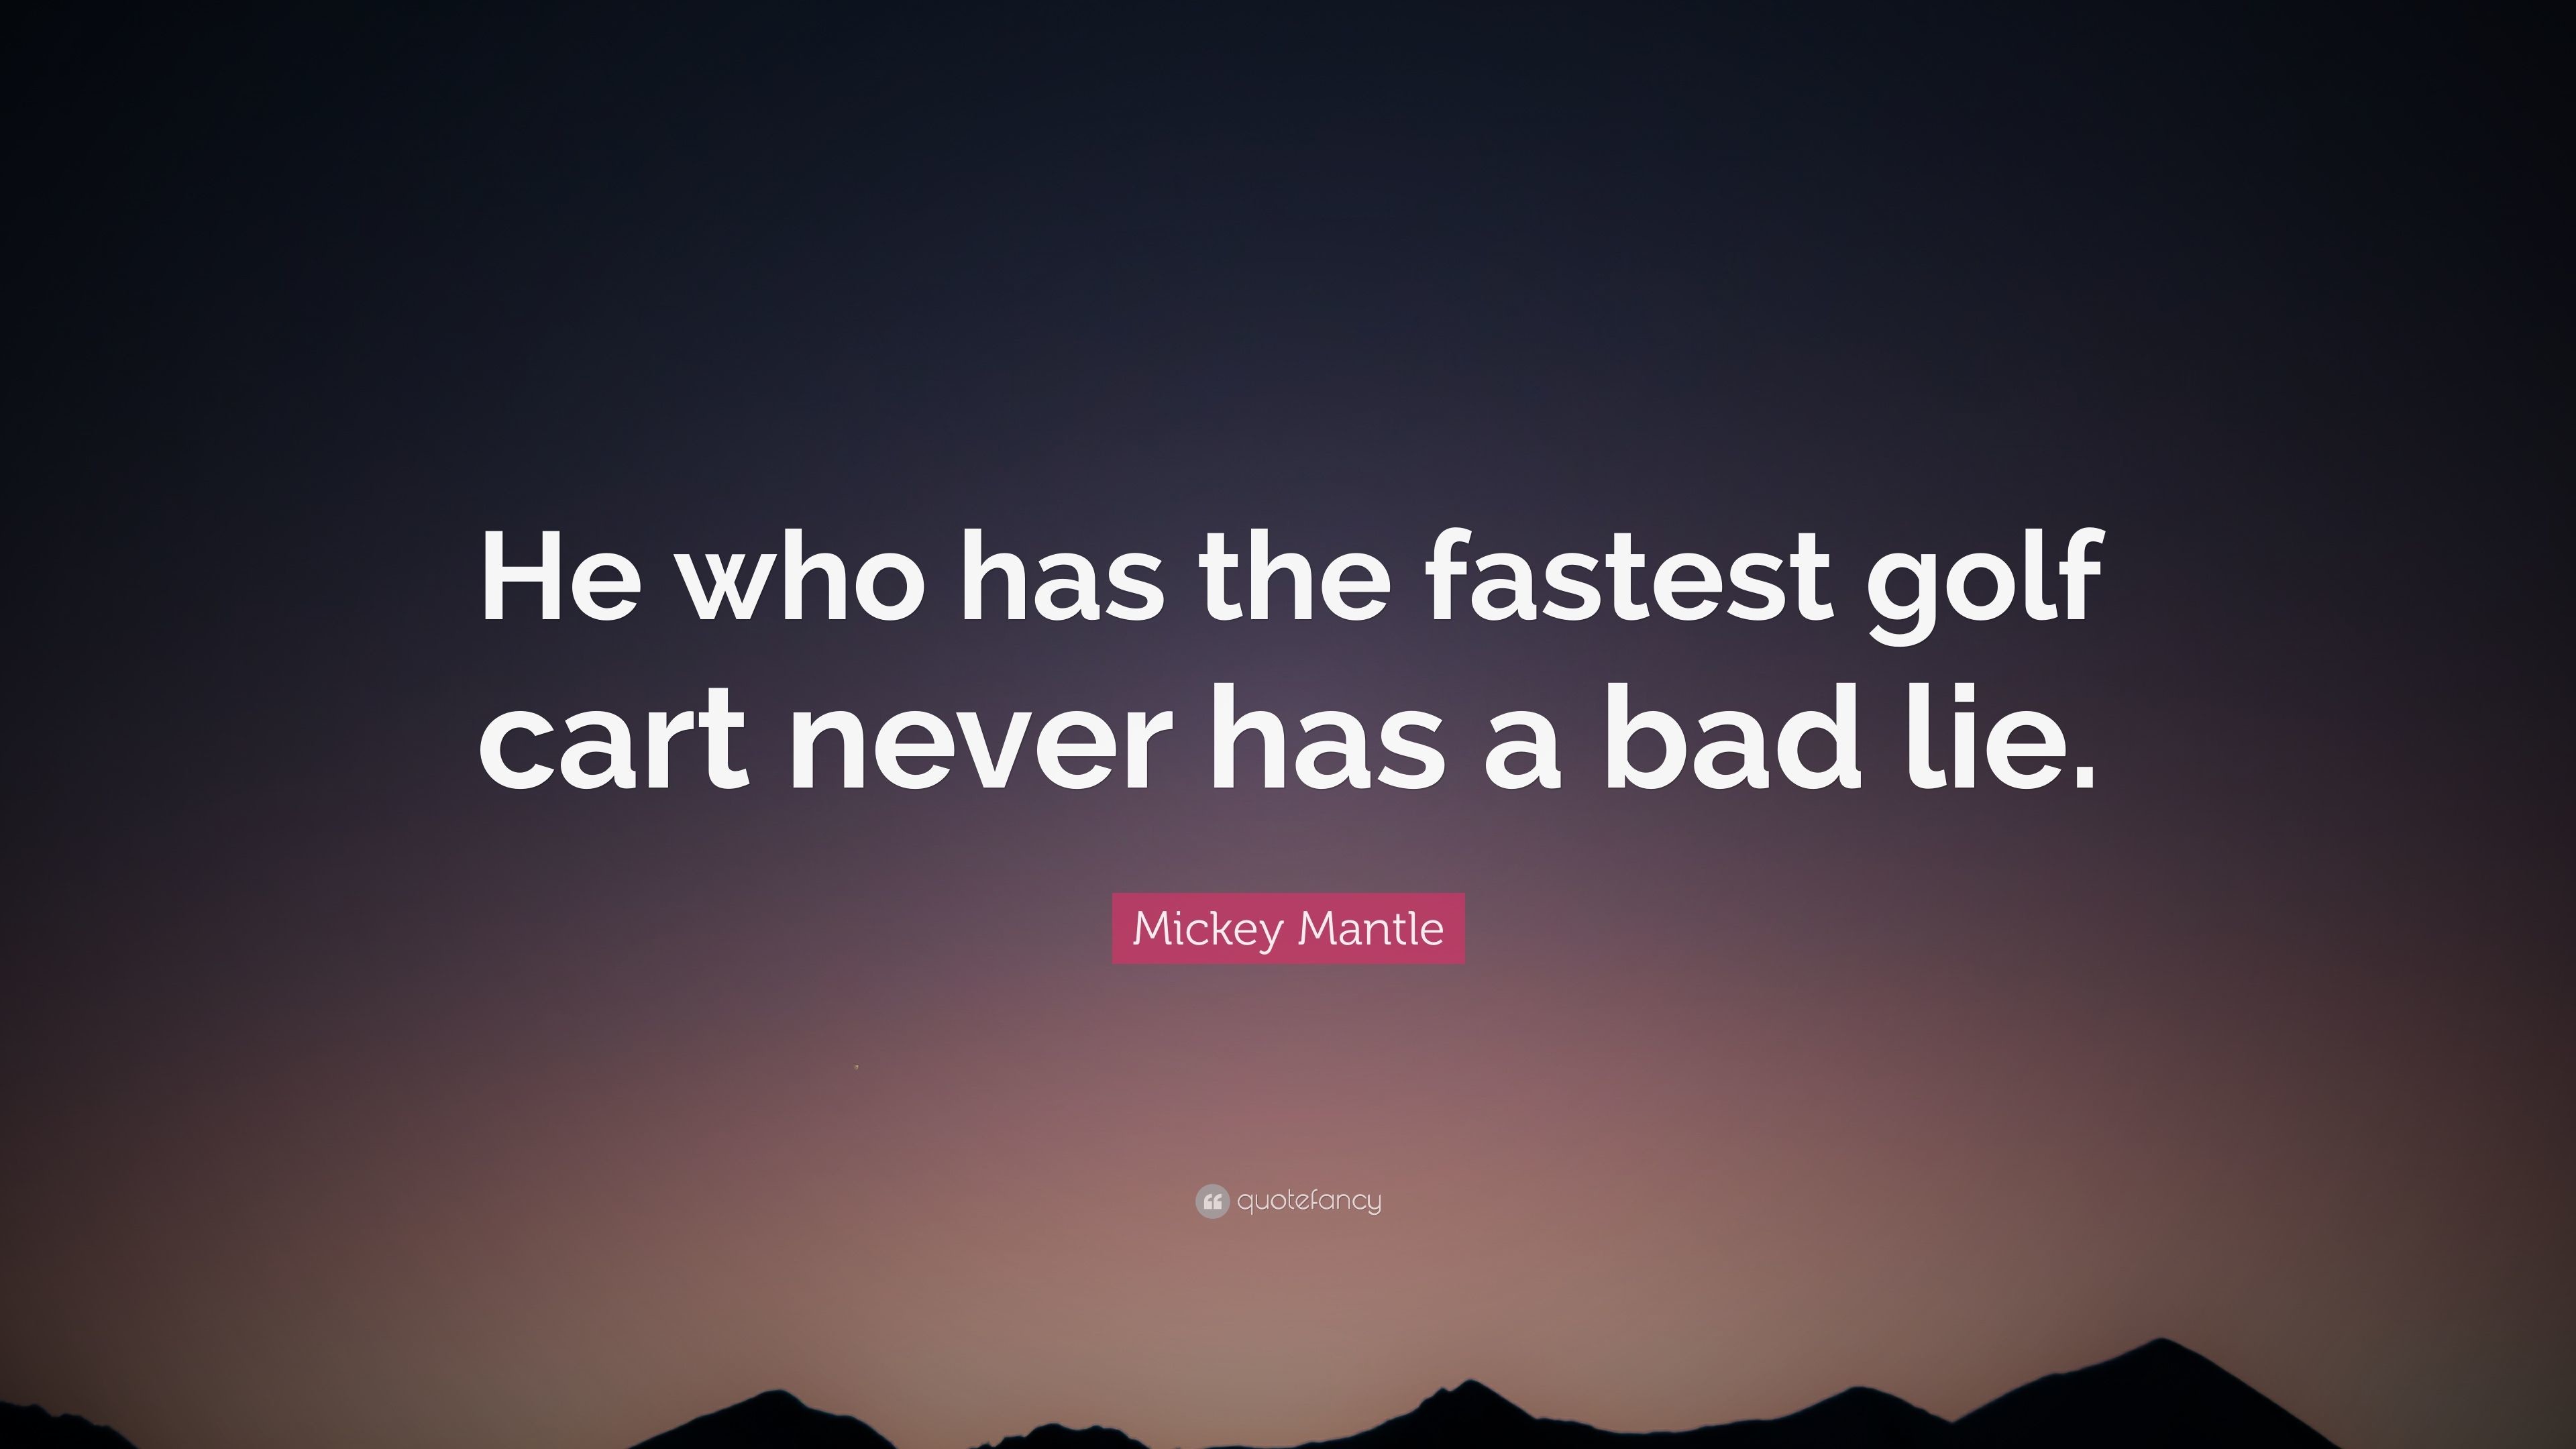 3840x2160 Mickey Mantle Quote: “He who has the fastest golf cart never has a bad